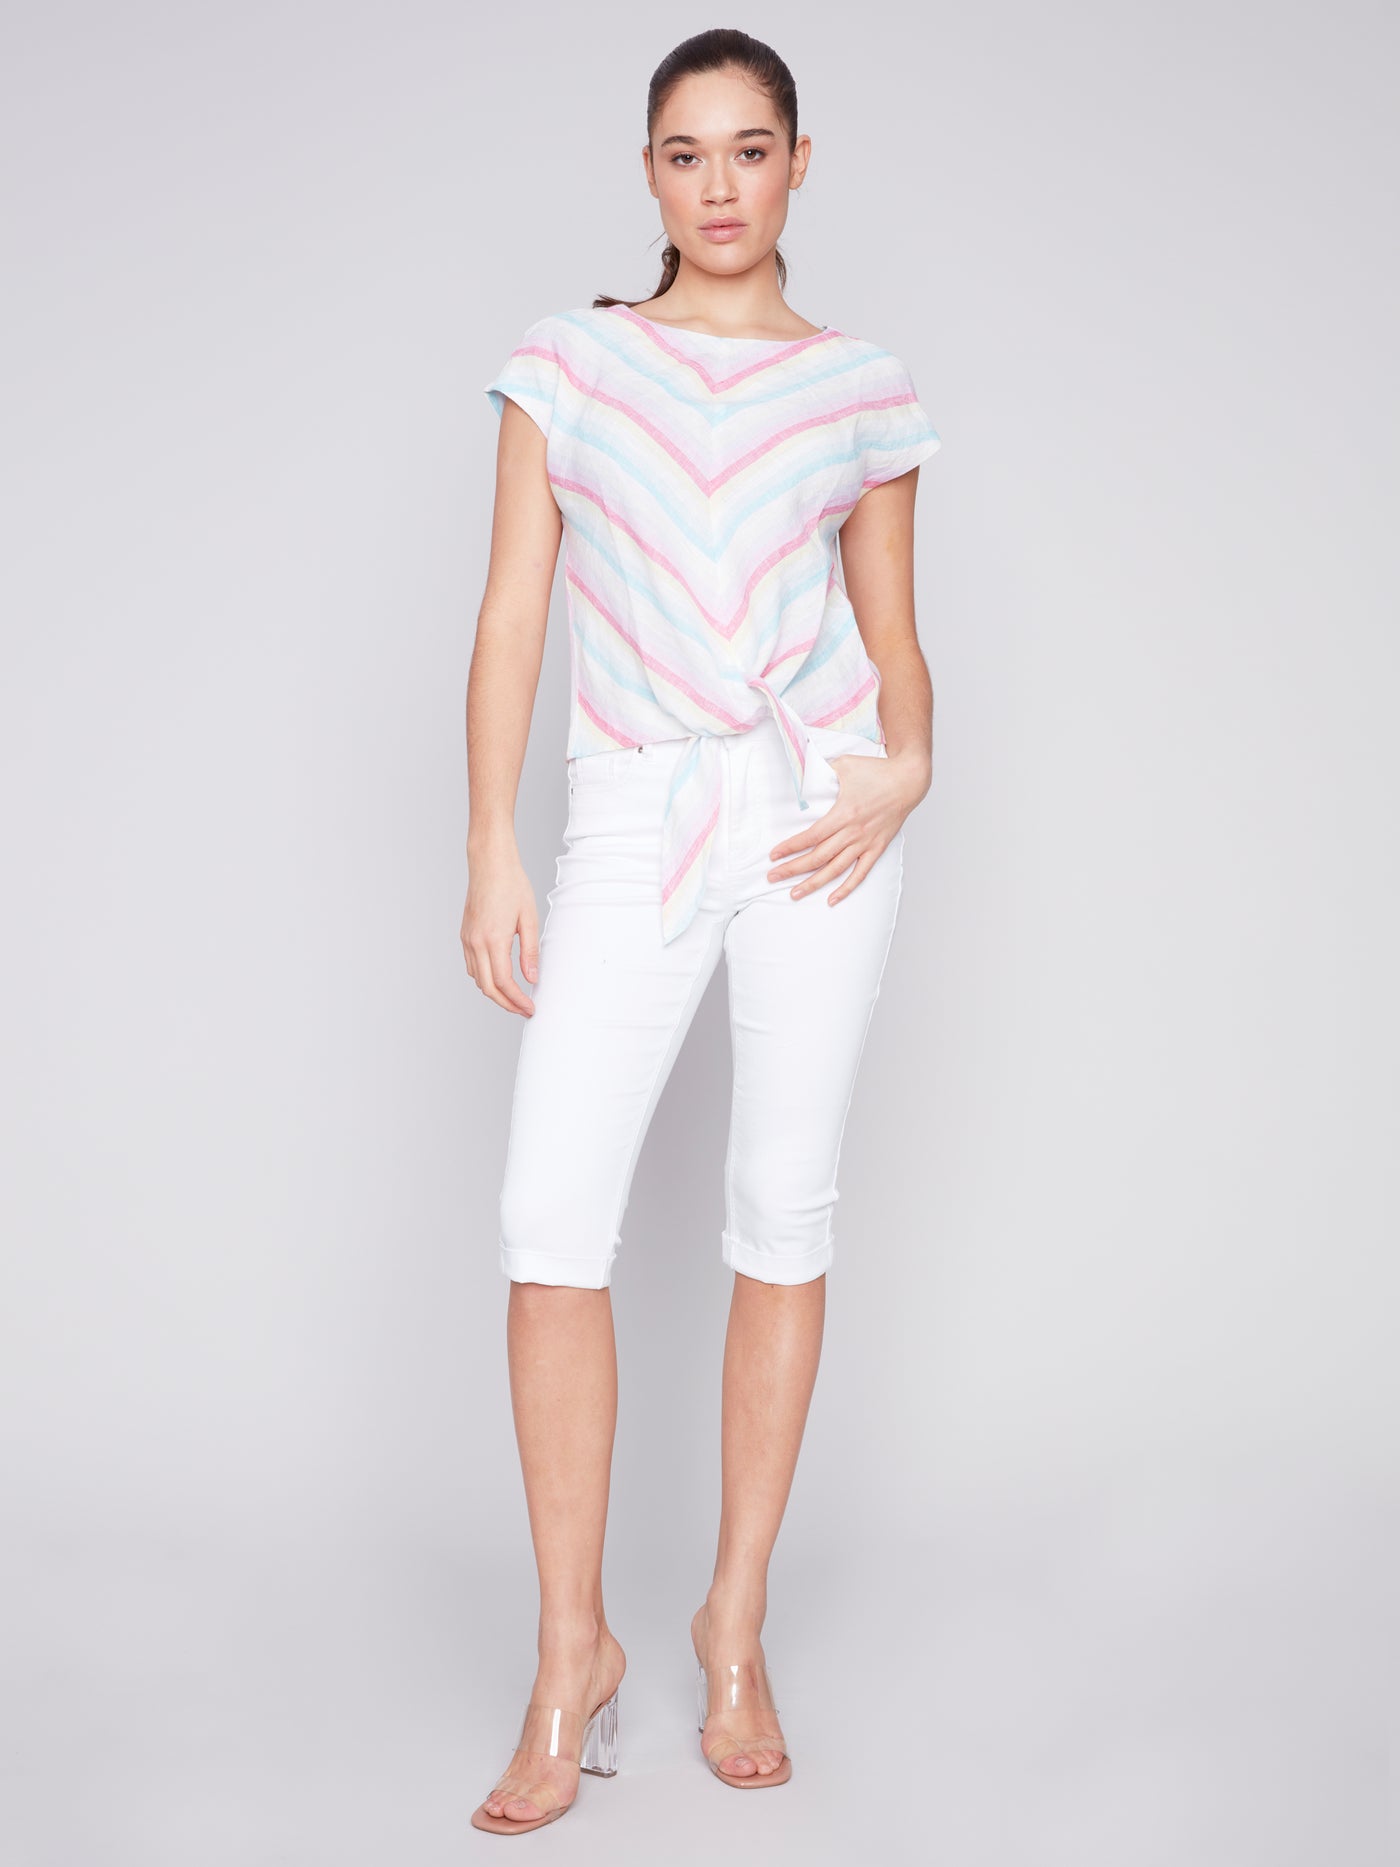 Charlie B Top - Front Tie Stripe - Lavender - SMALL